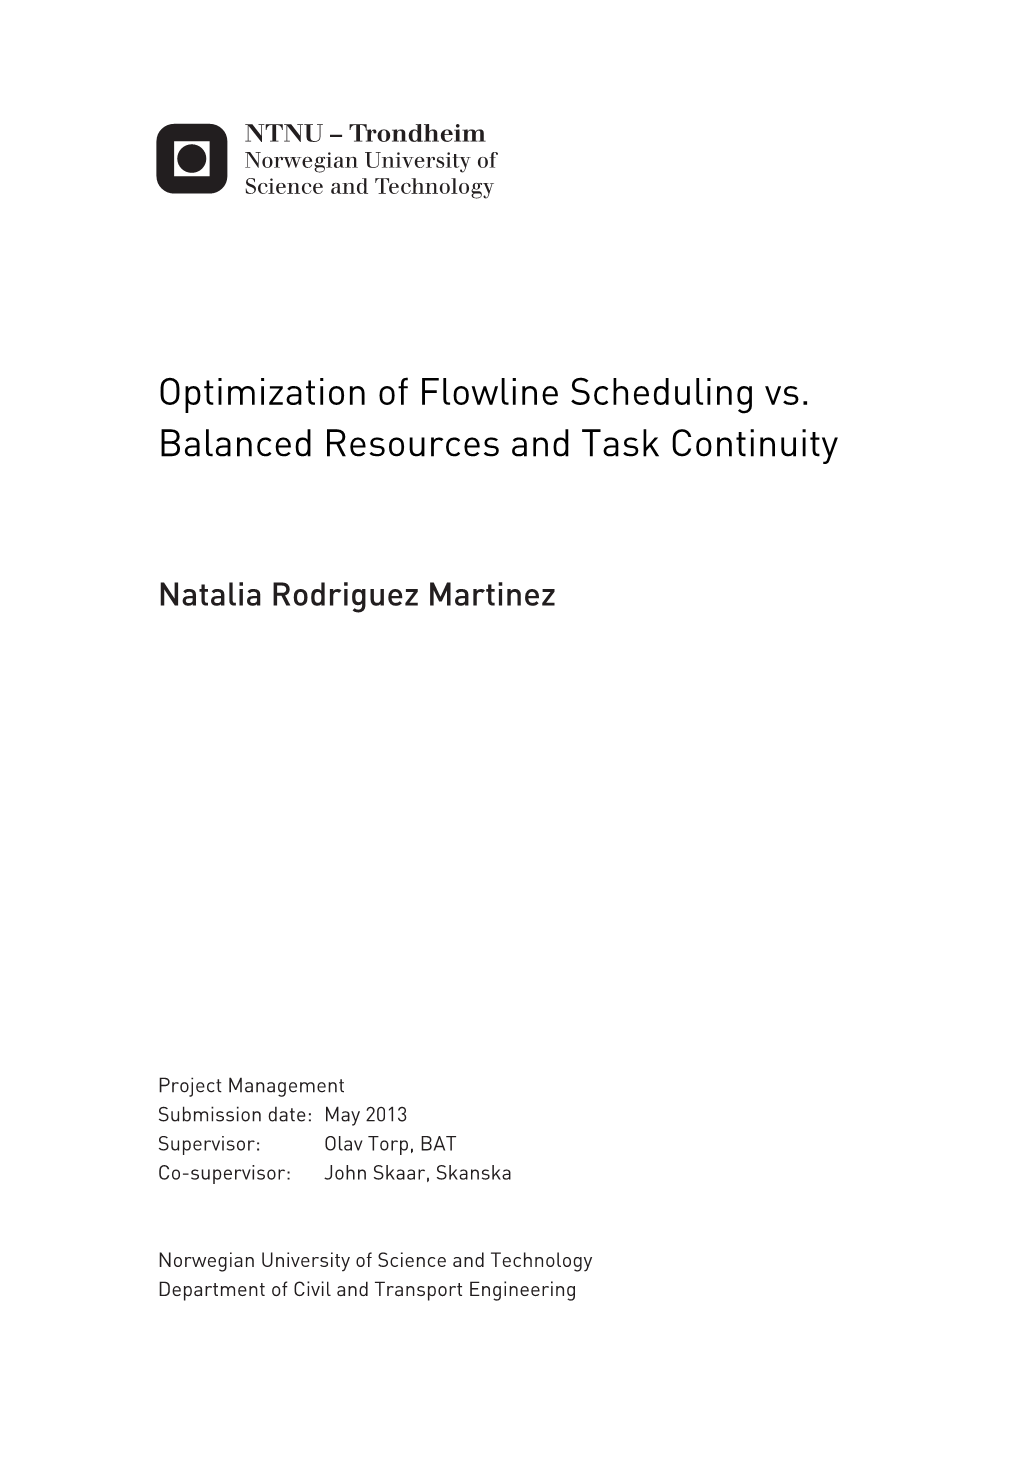 Optimization of Flowline Scheduling Vs. Balanced Resources and Task Continuity